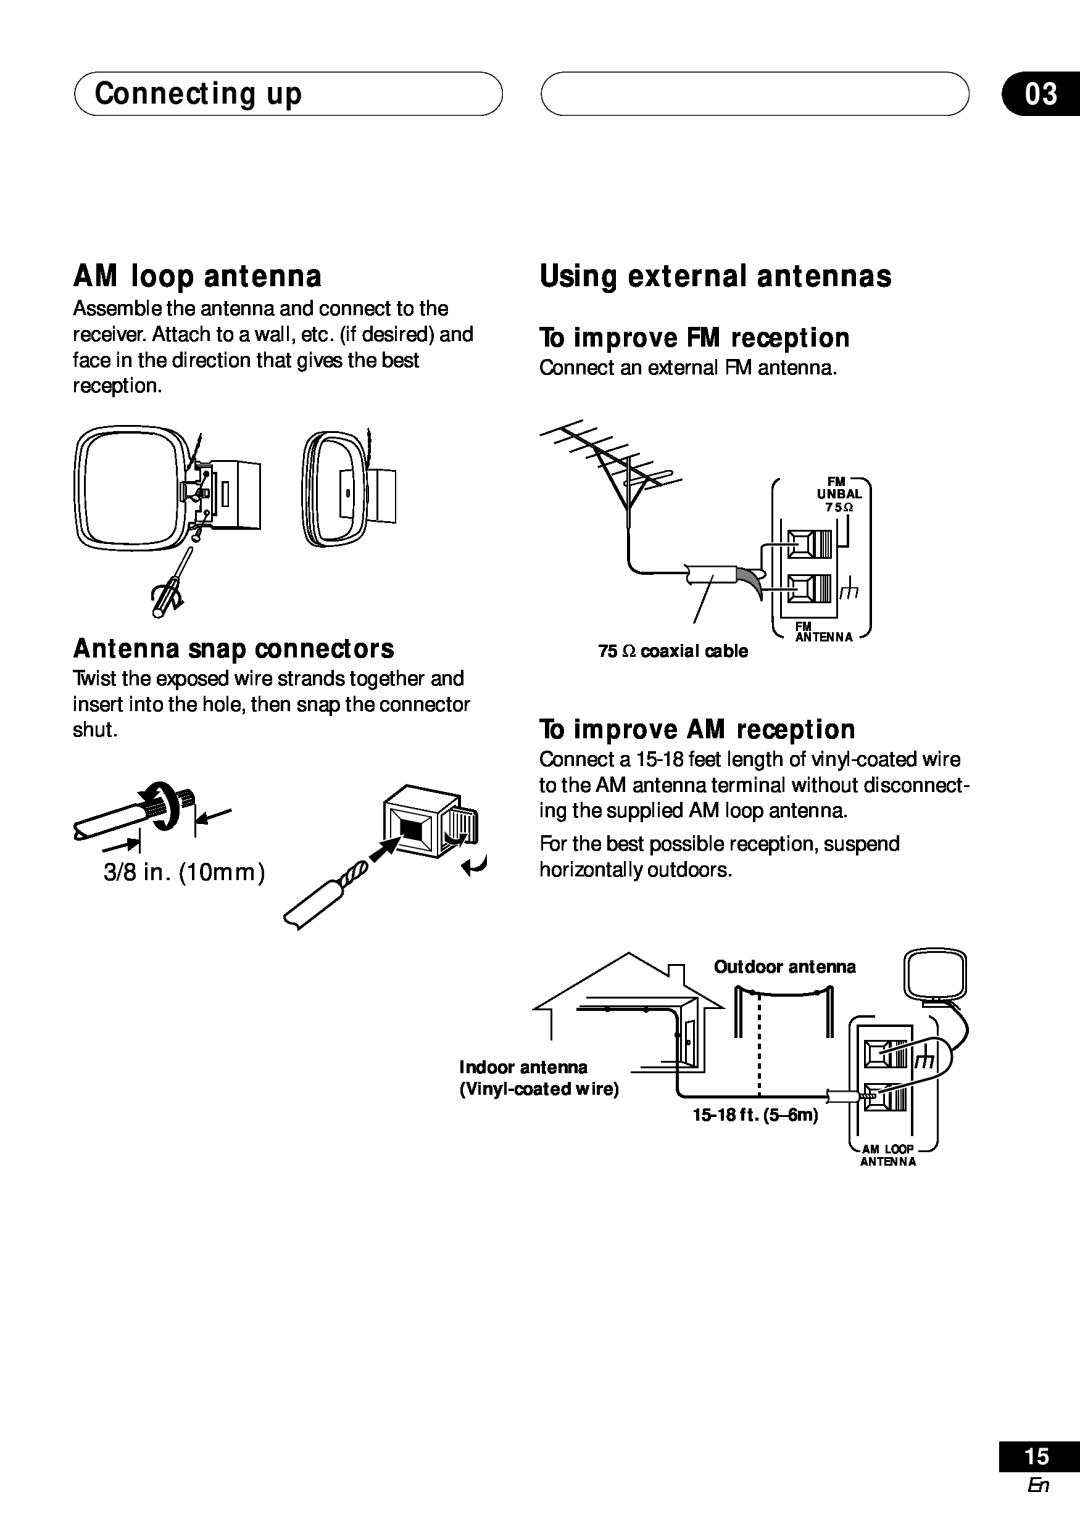 Pioneer VSX-D411 Connecting up AM loop antenna, Using external antennas, To improve FM reception, Antenna snap connectors 